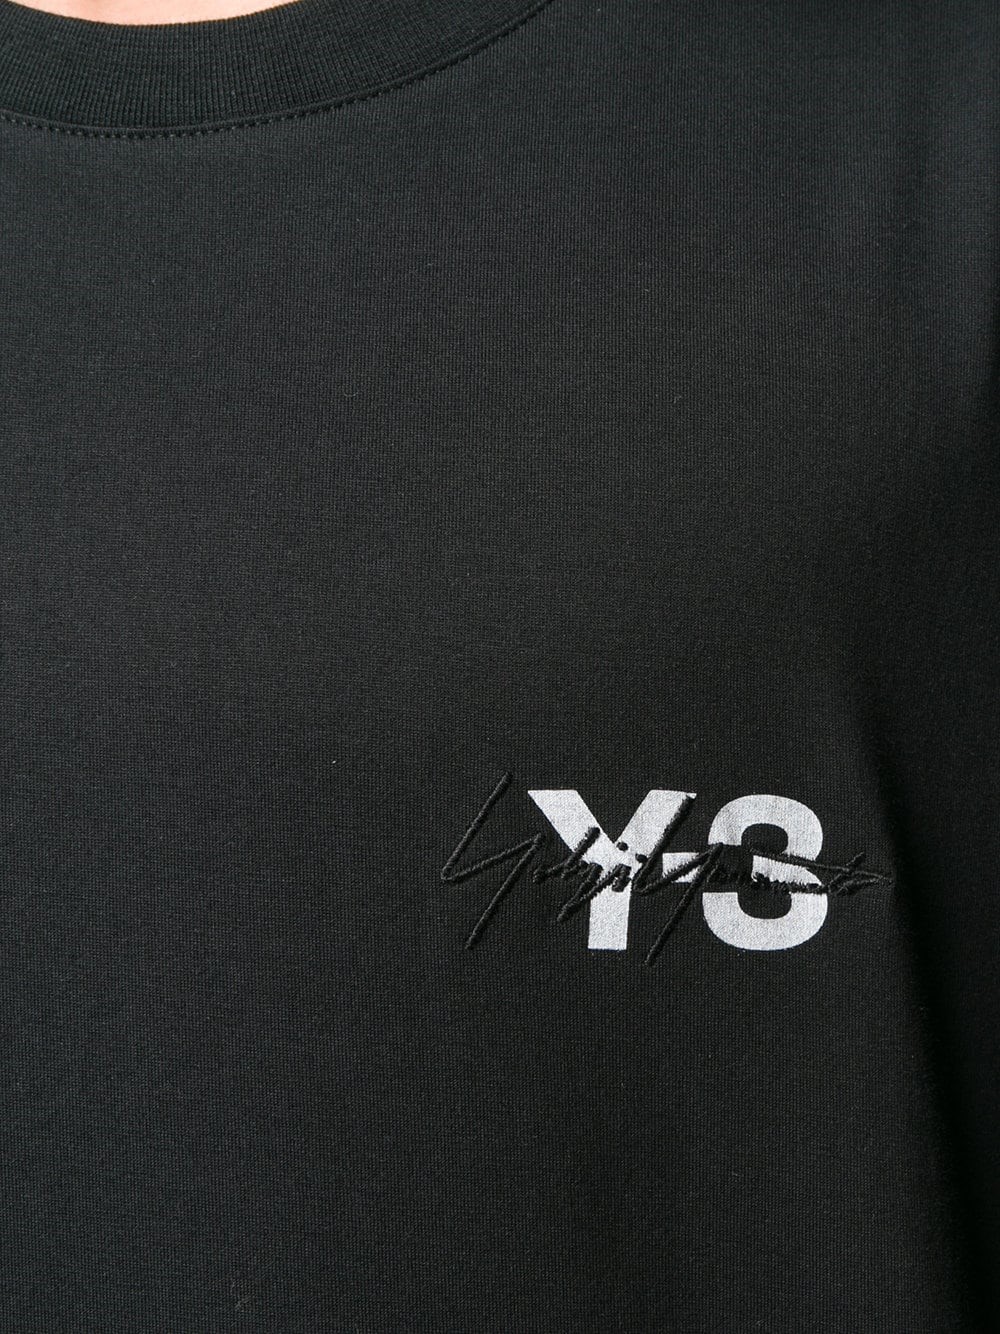 y-3 LOGO T-SHIRT available on montiboutique.com - 24546